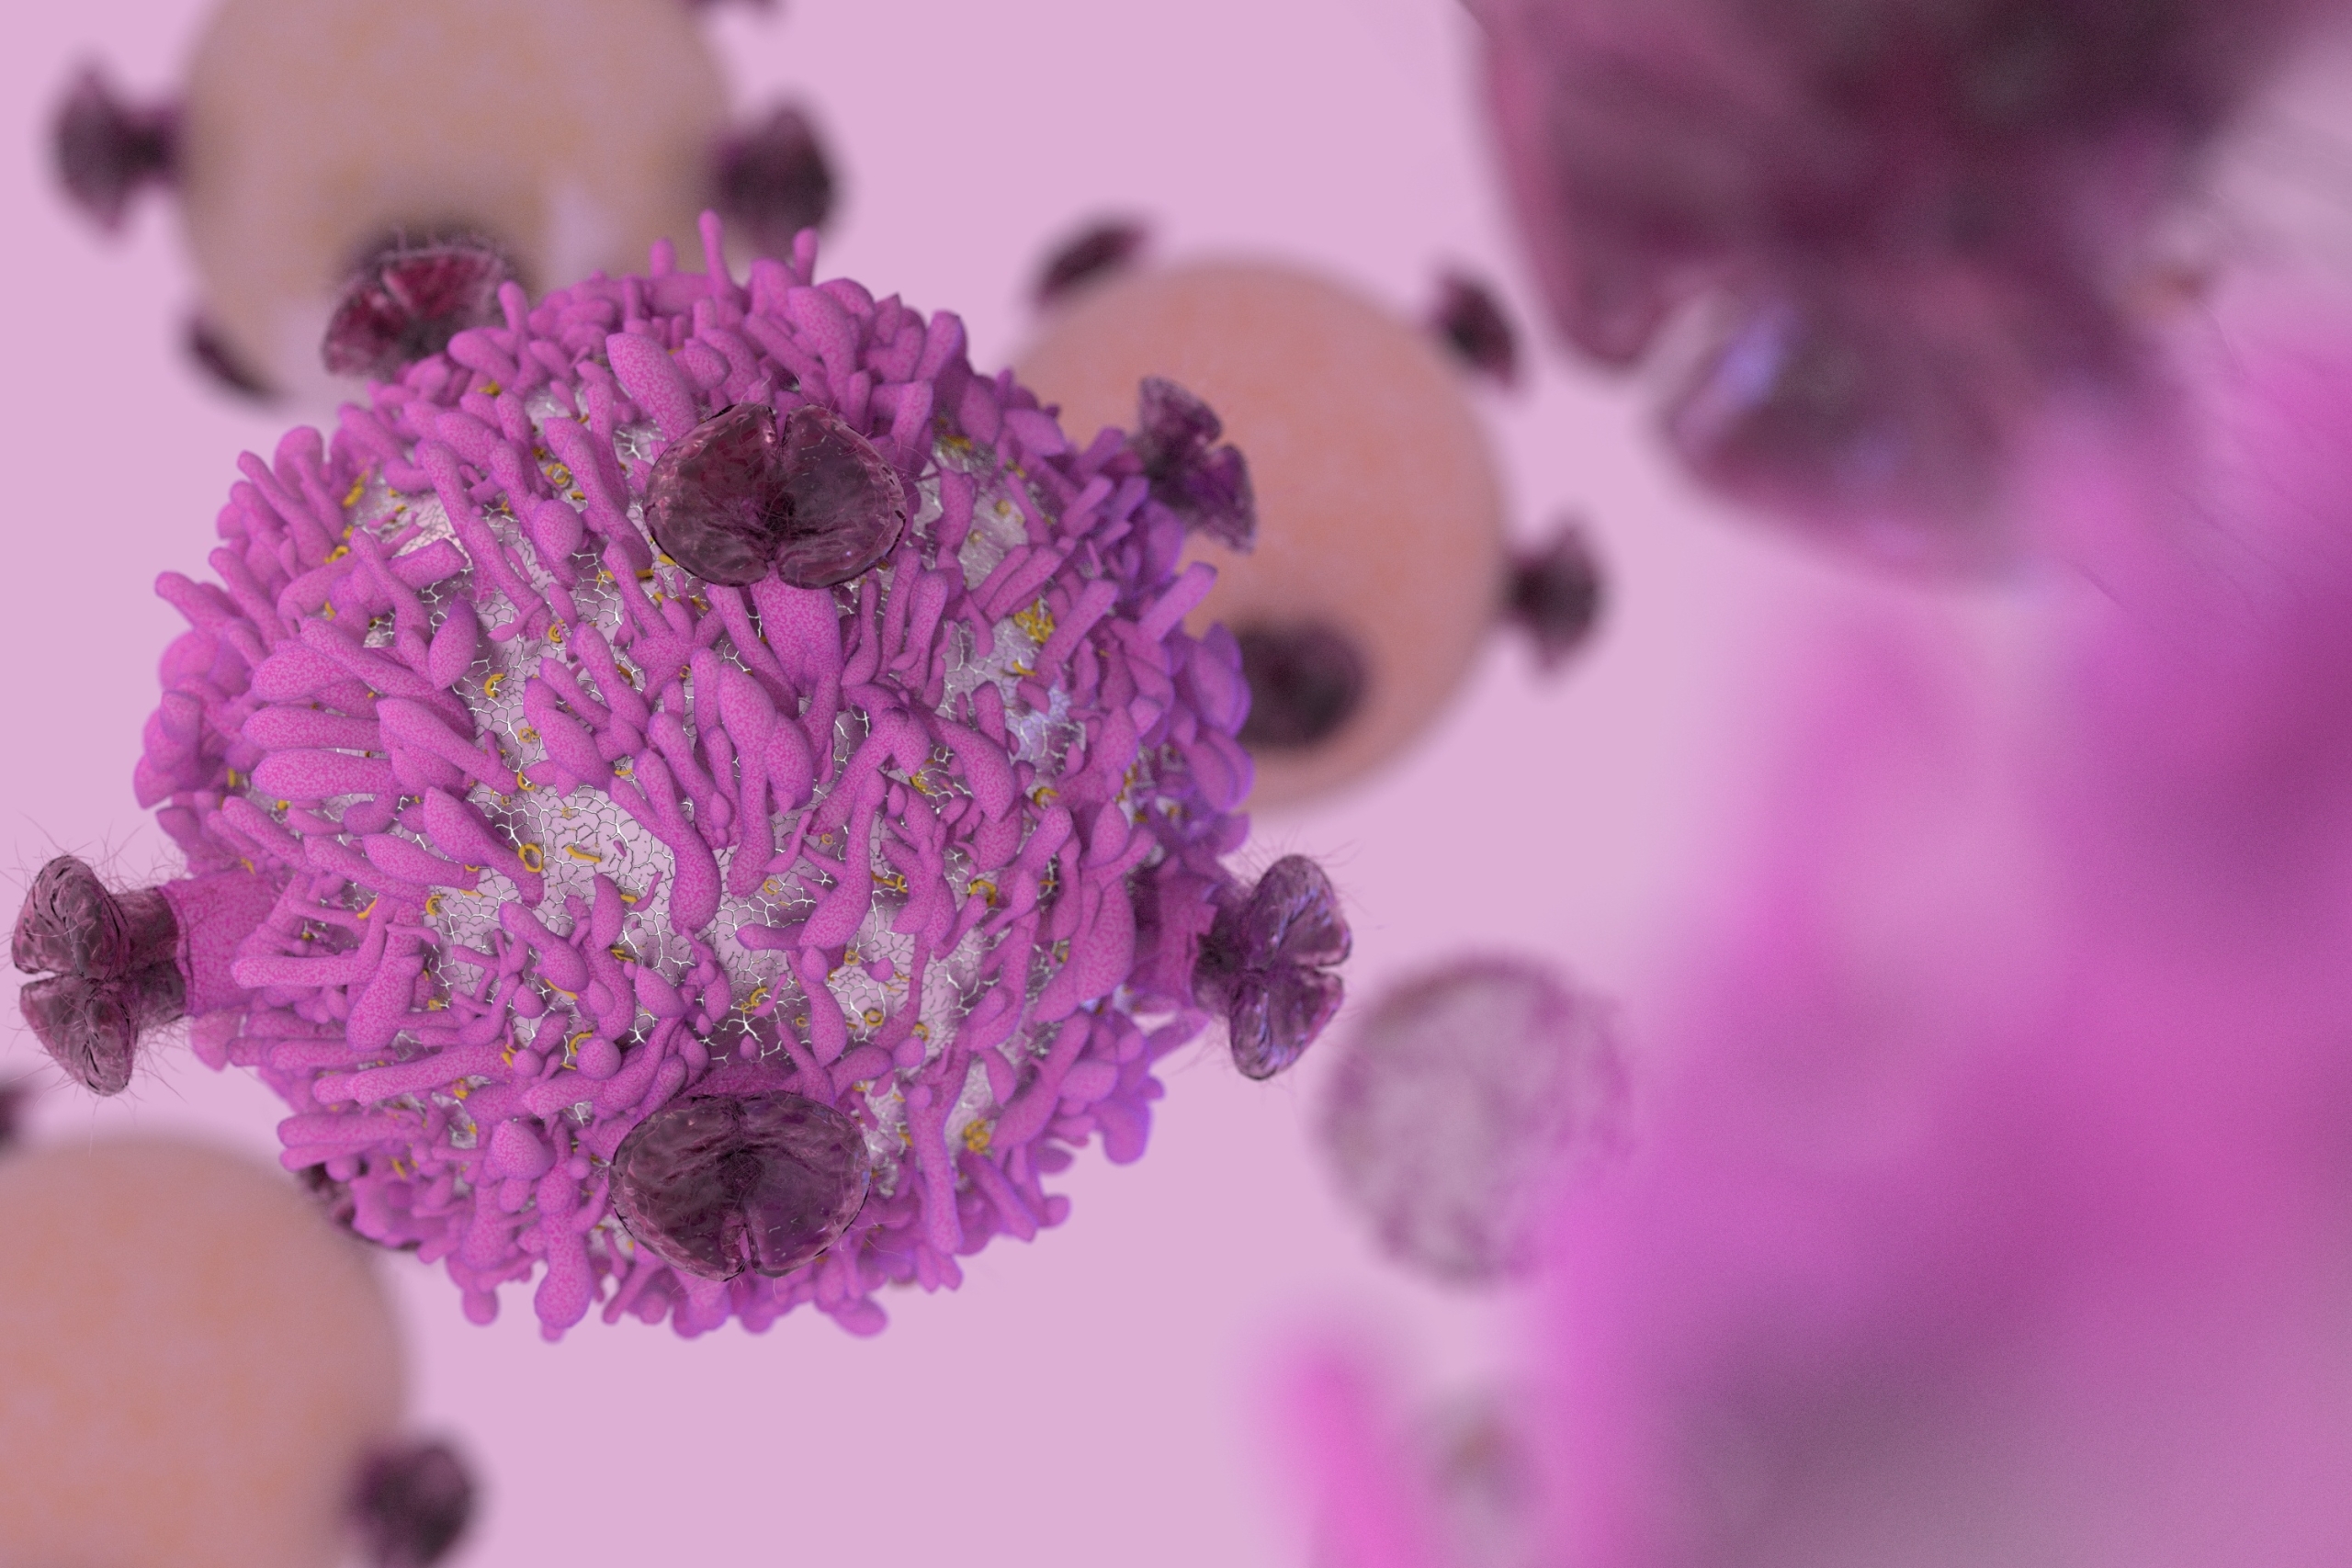 3D medical render of an immune T Cell lymphocyte with receptors for cancer cell immunotherapy research. The cell is round with six receptors on the surface.